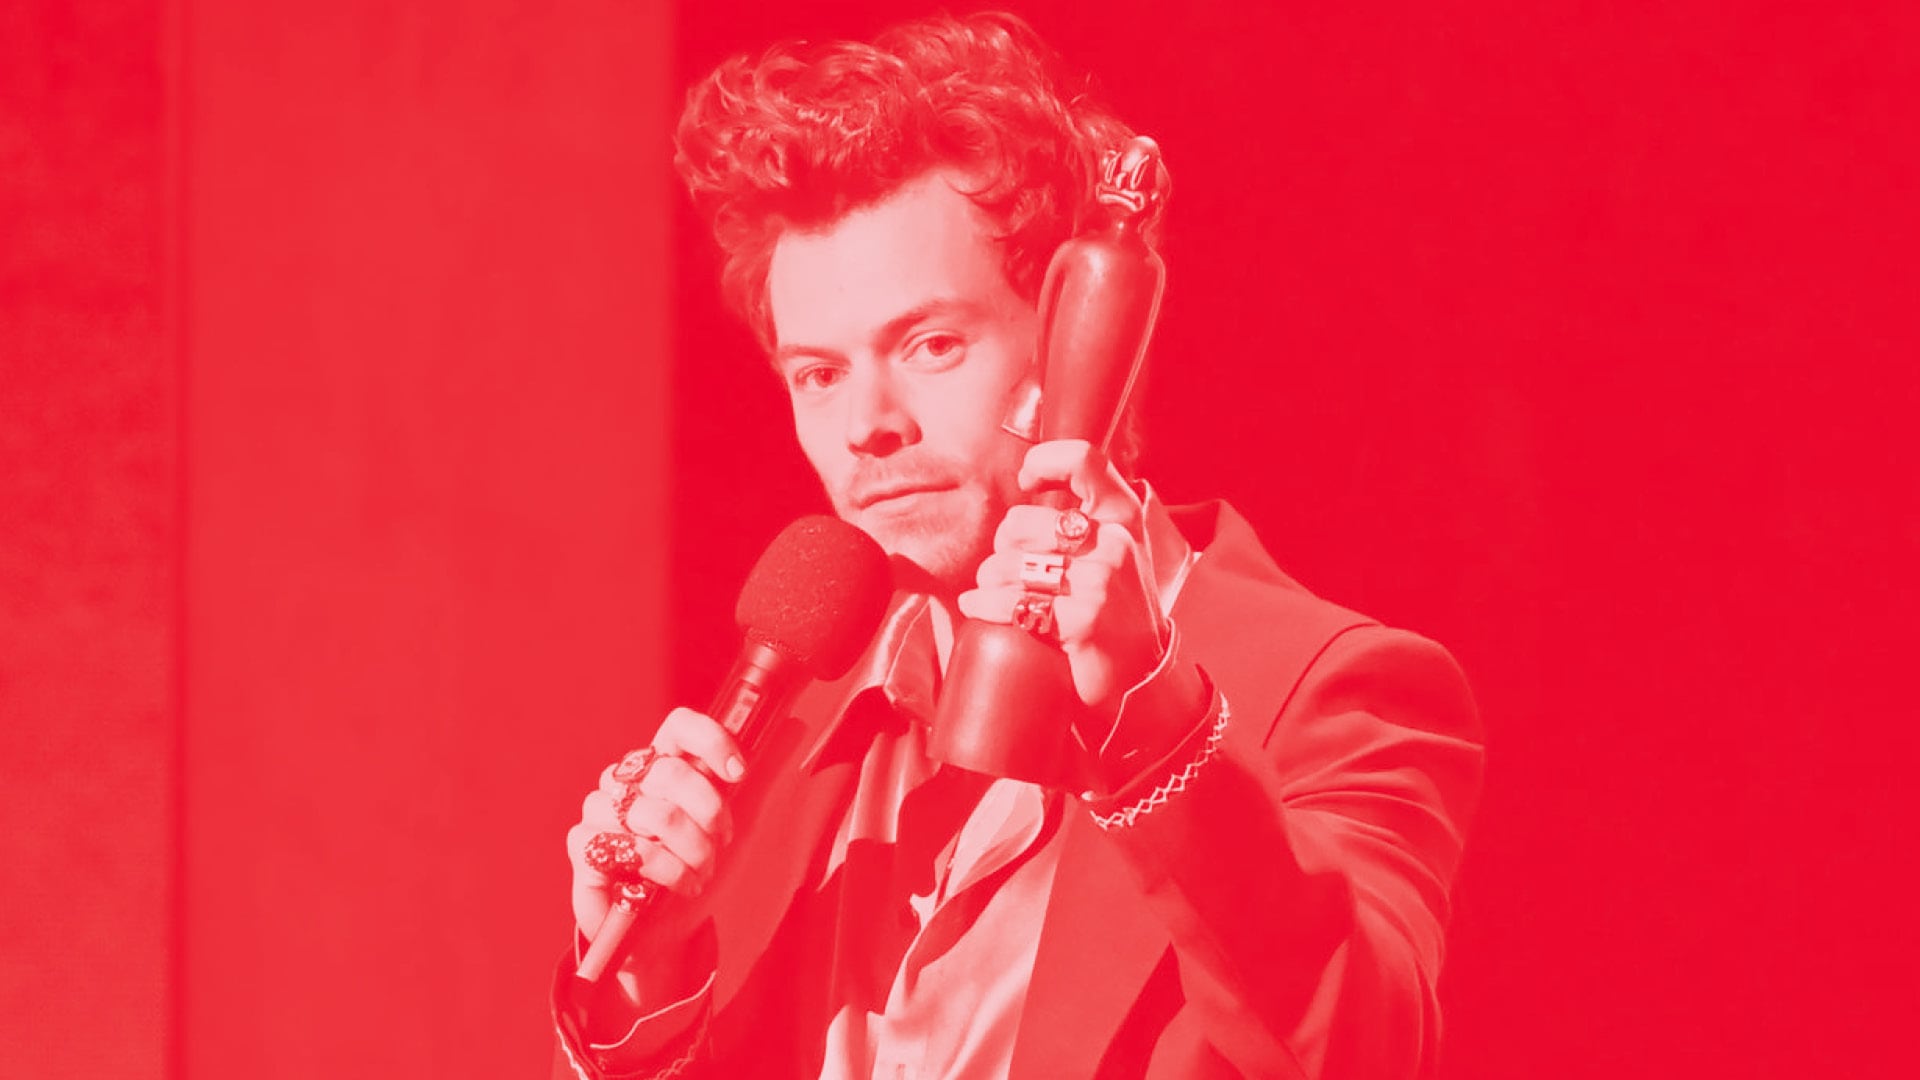 Harry Styles: The New Bowie or a Marketing Dream?